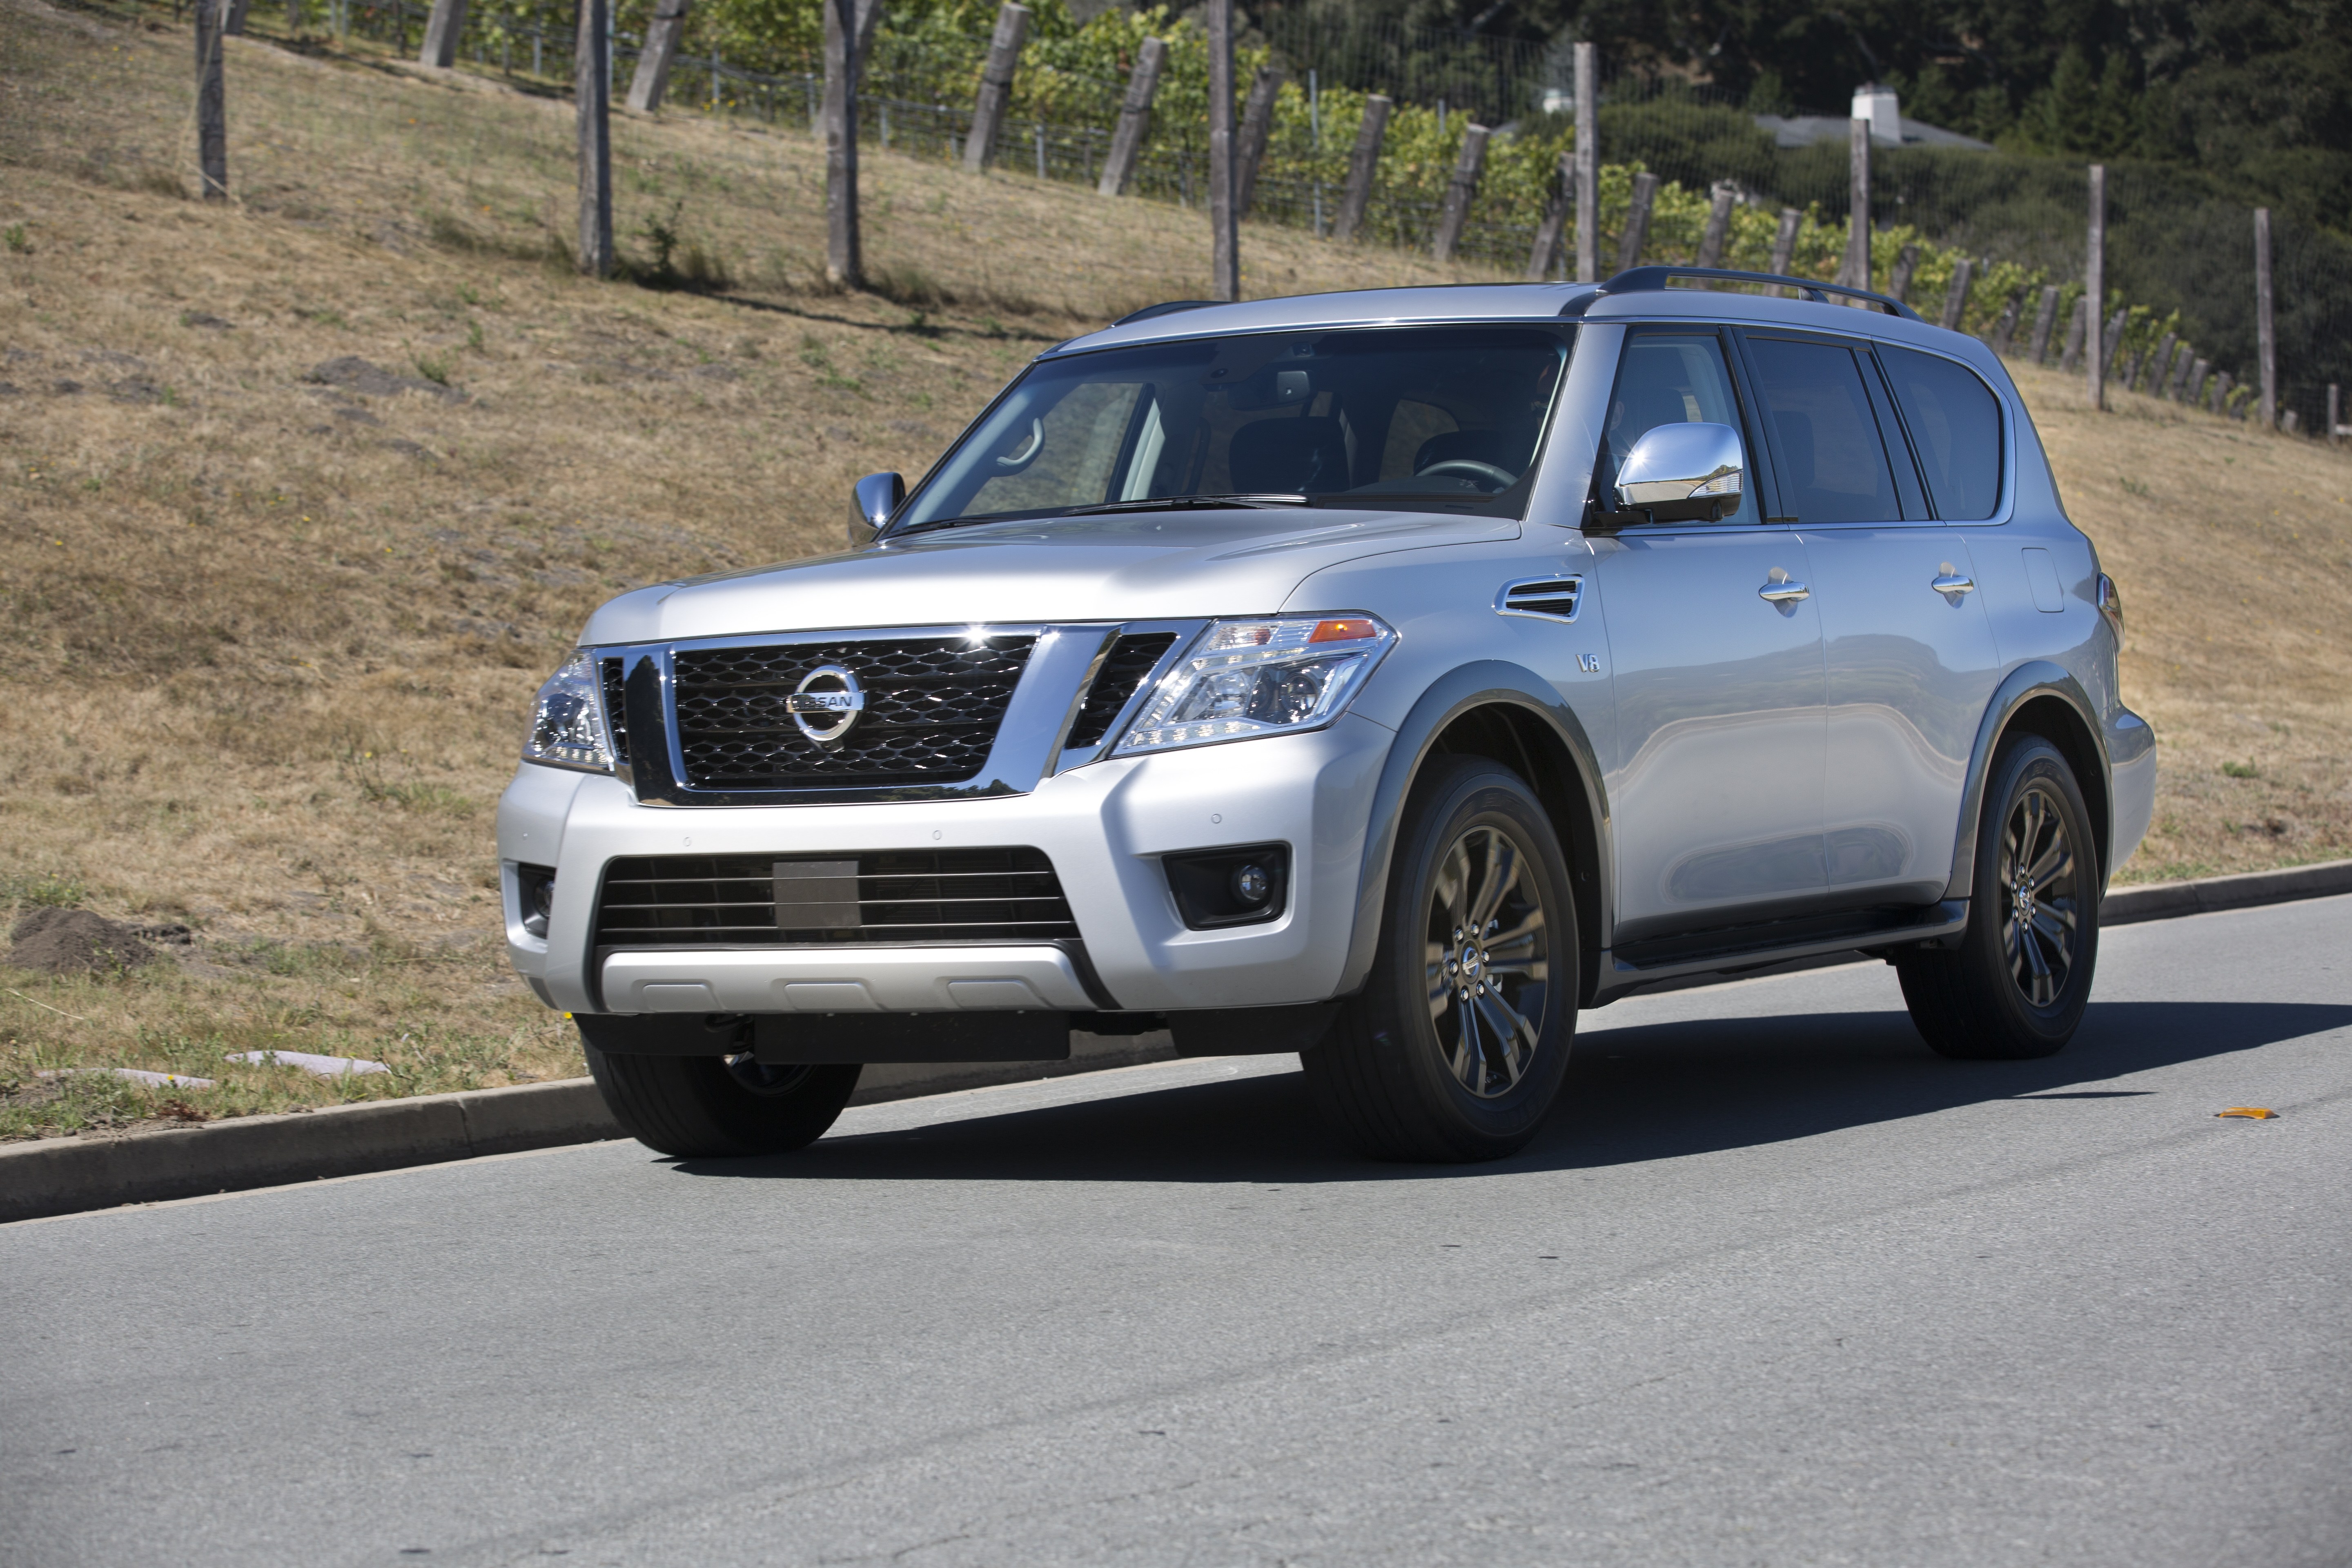 All-New 2017 Nissan Armada Increases Power, Comfort, Off-Road Capability (VIDEO)